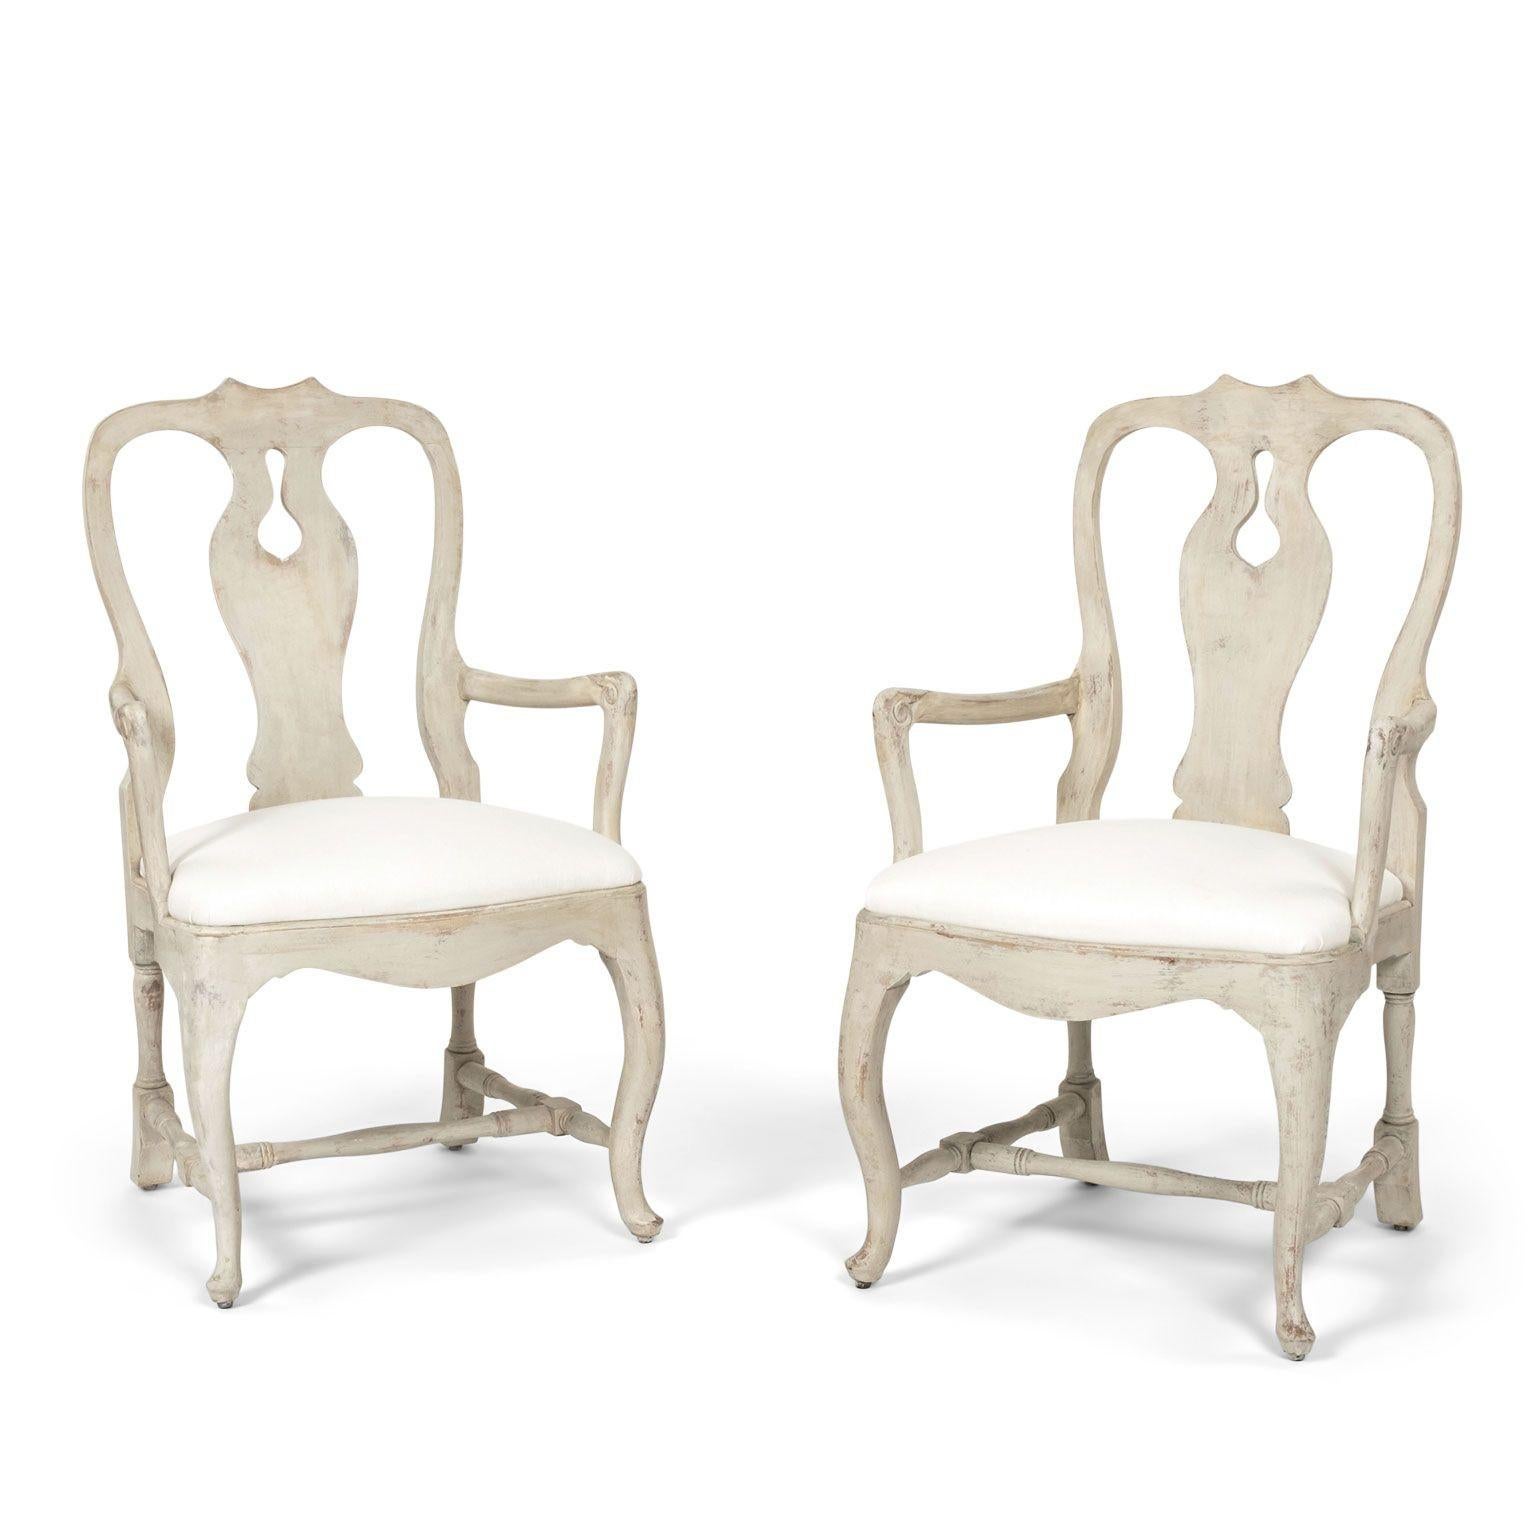 Pair of hand-carved vintage Swedish rococo style armchairs in off-white paint. Nice generous proportions, turned stretchers, pad feet and off-white color linen seats. Sold together and priced $3,600 as a pair.